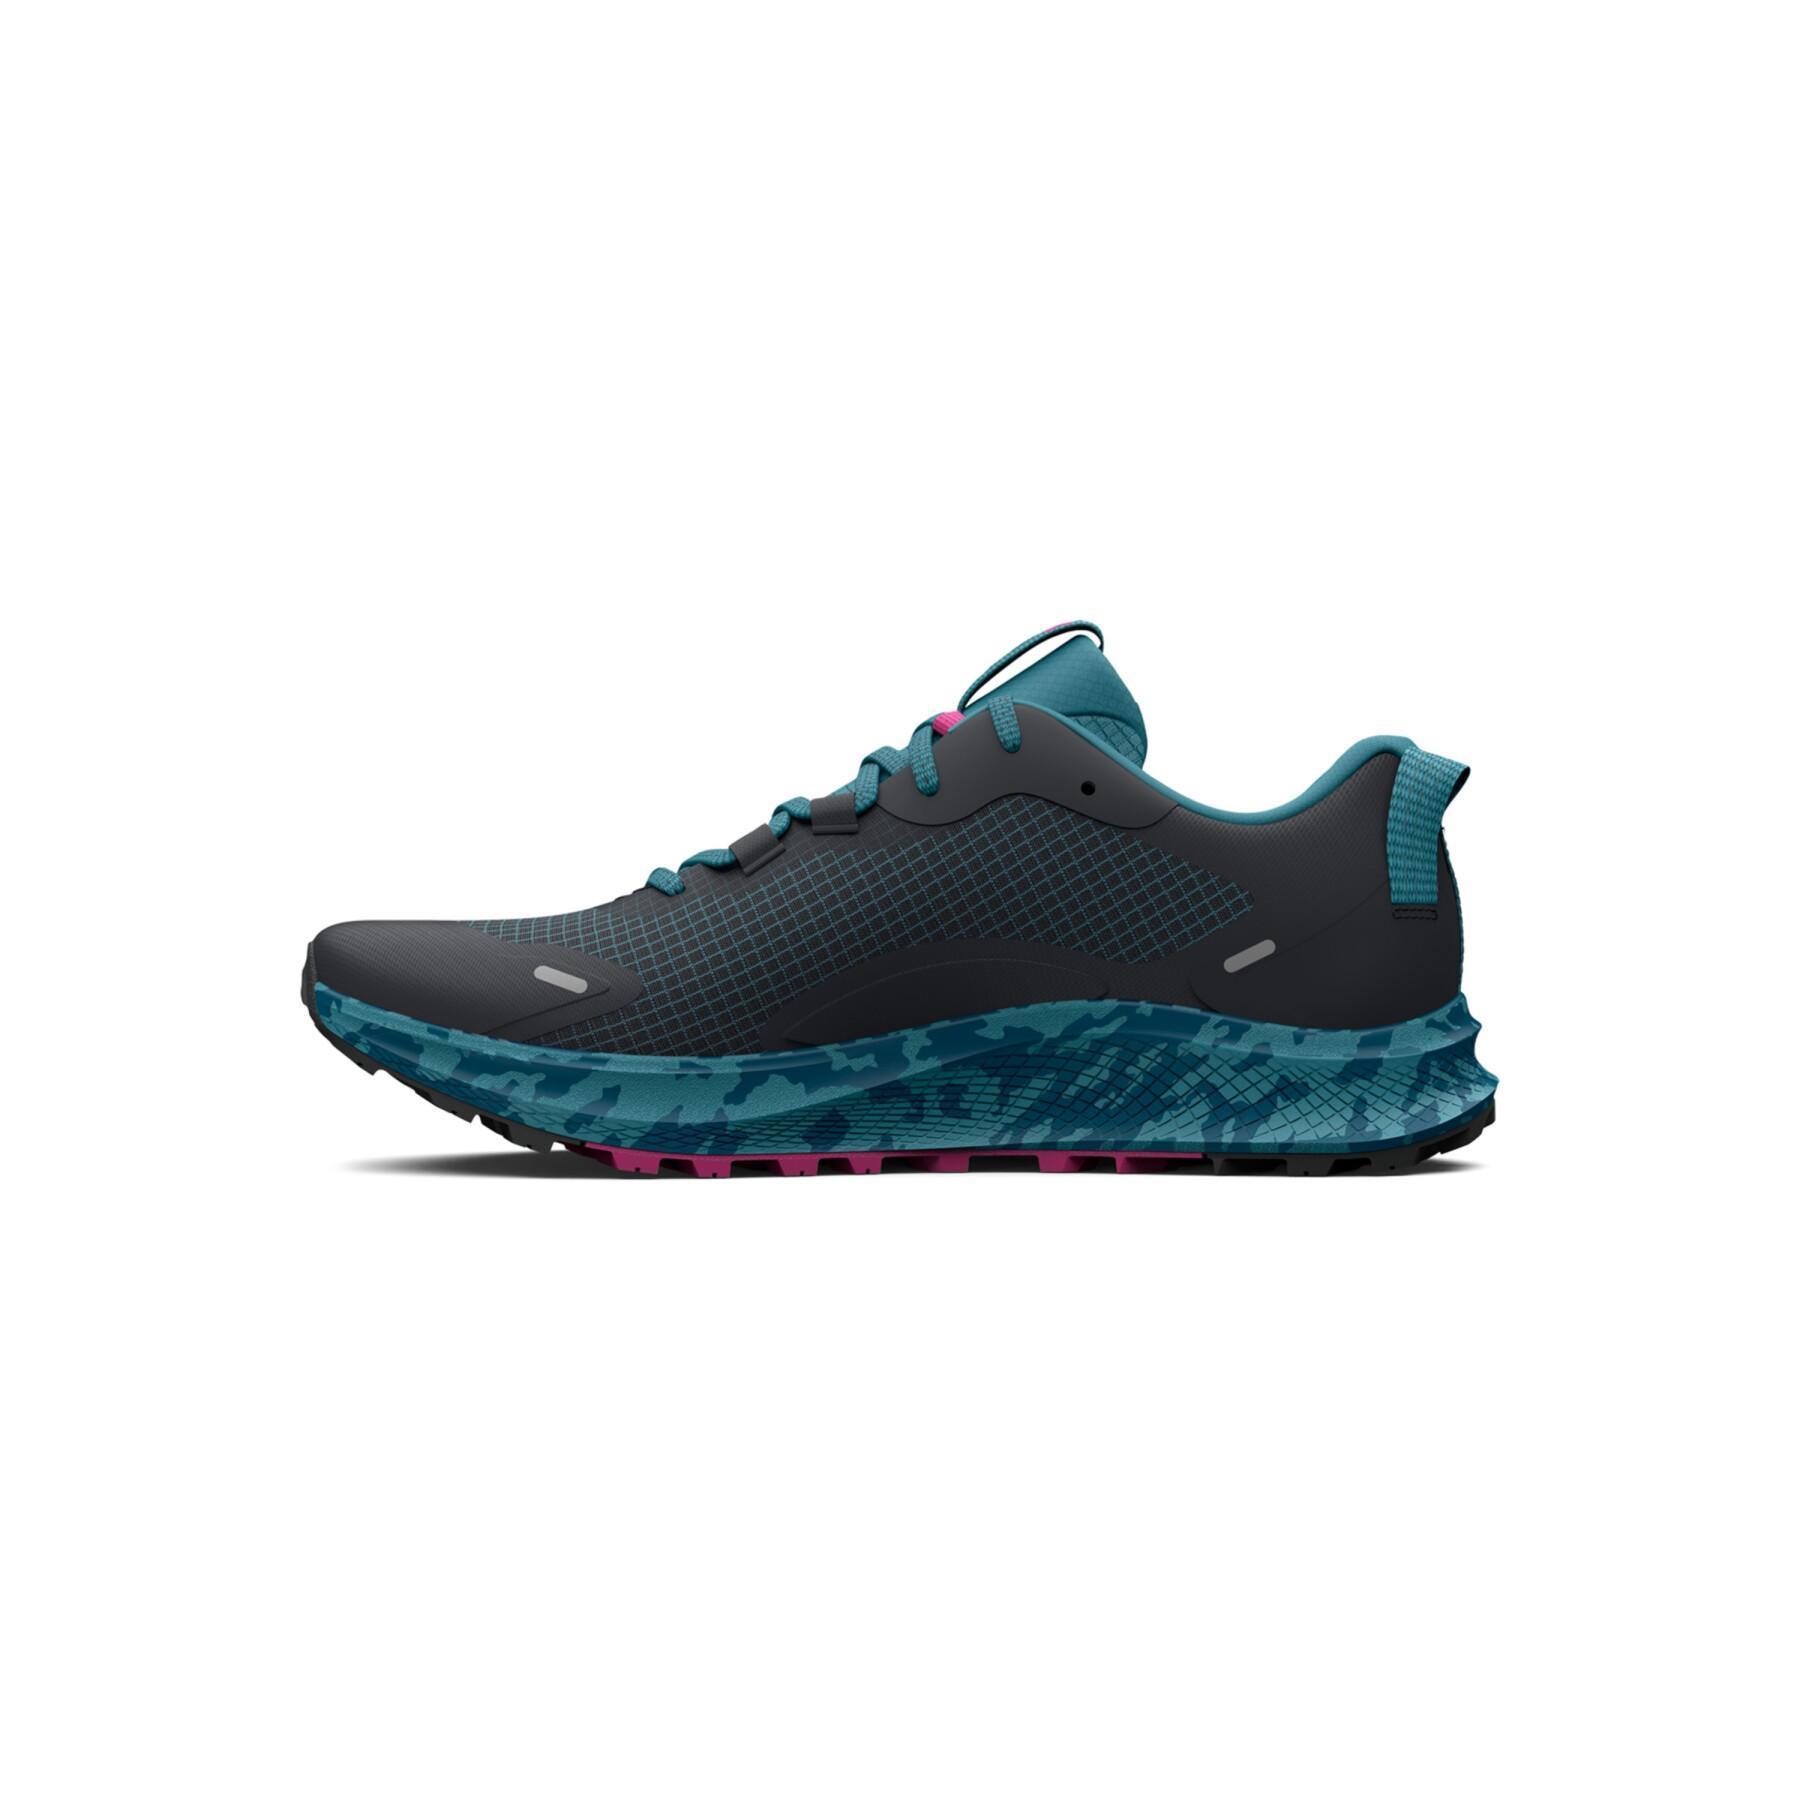 Women's trail running shoes Under Armour Charged Bandit TR 2 SP